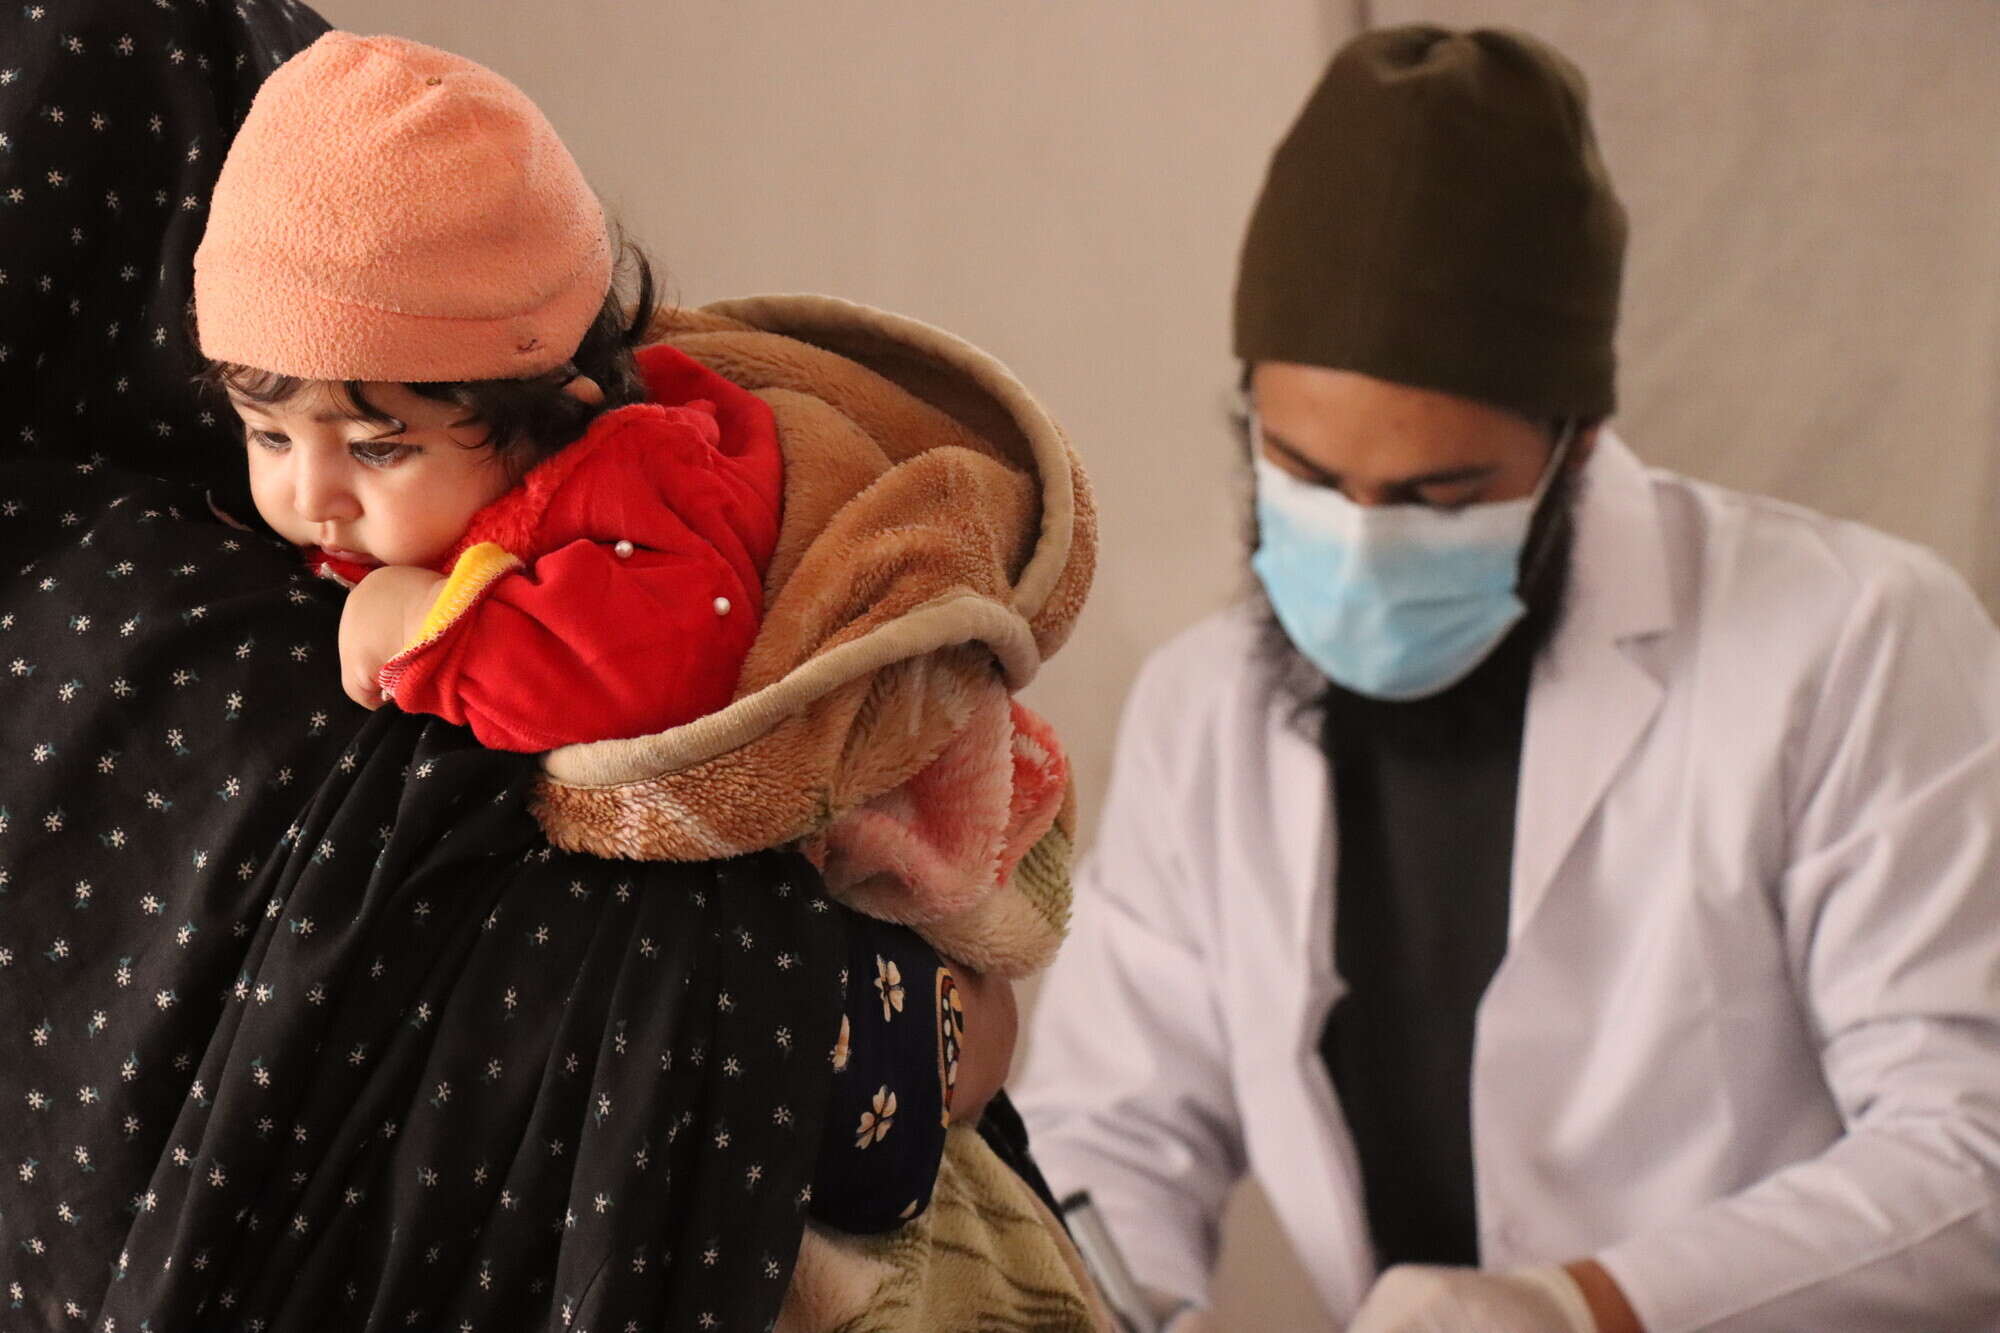 Belqees brought her six-month-old to this mobile health clinic in Nahr-e-abdullah. The clinic visits this village weekly, providing health services to more than 200 families each time.